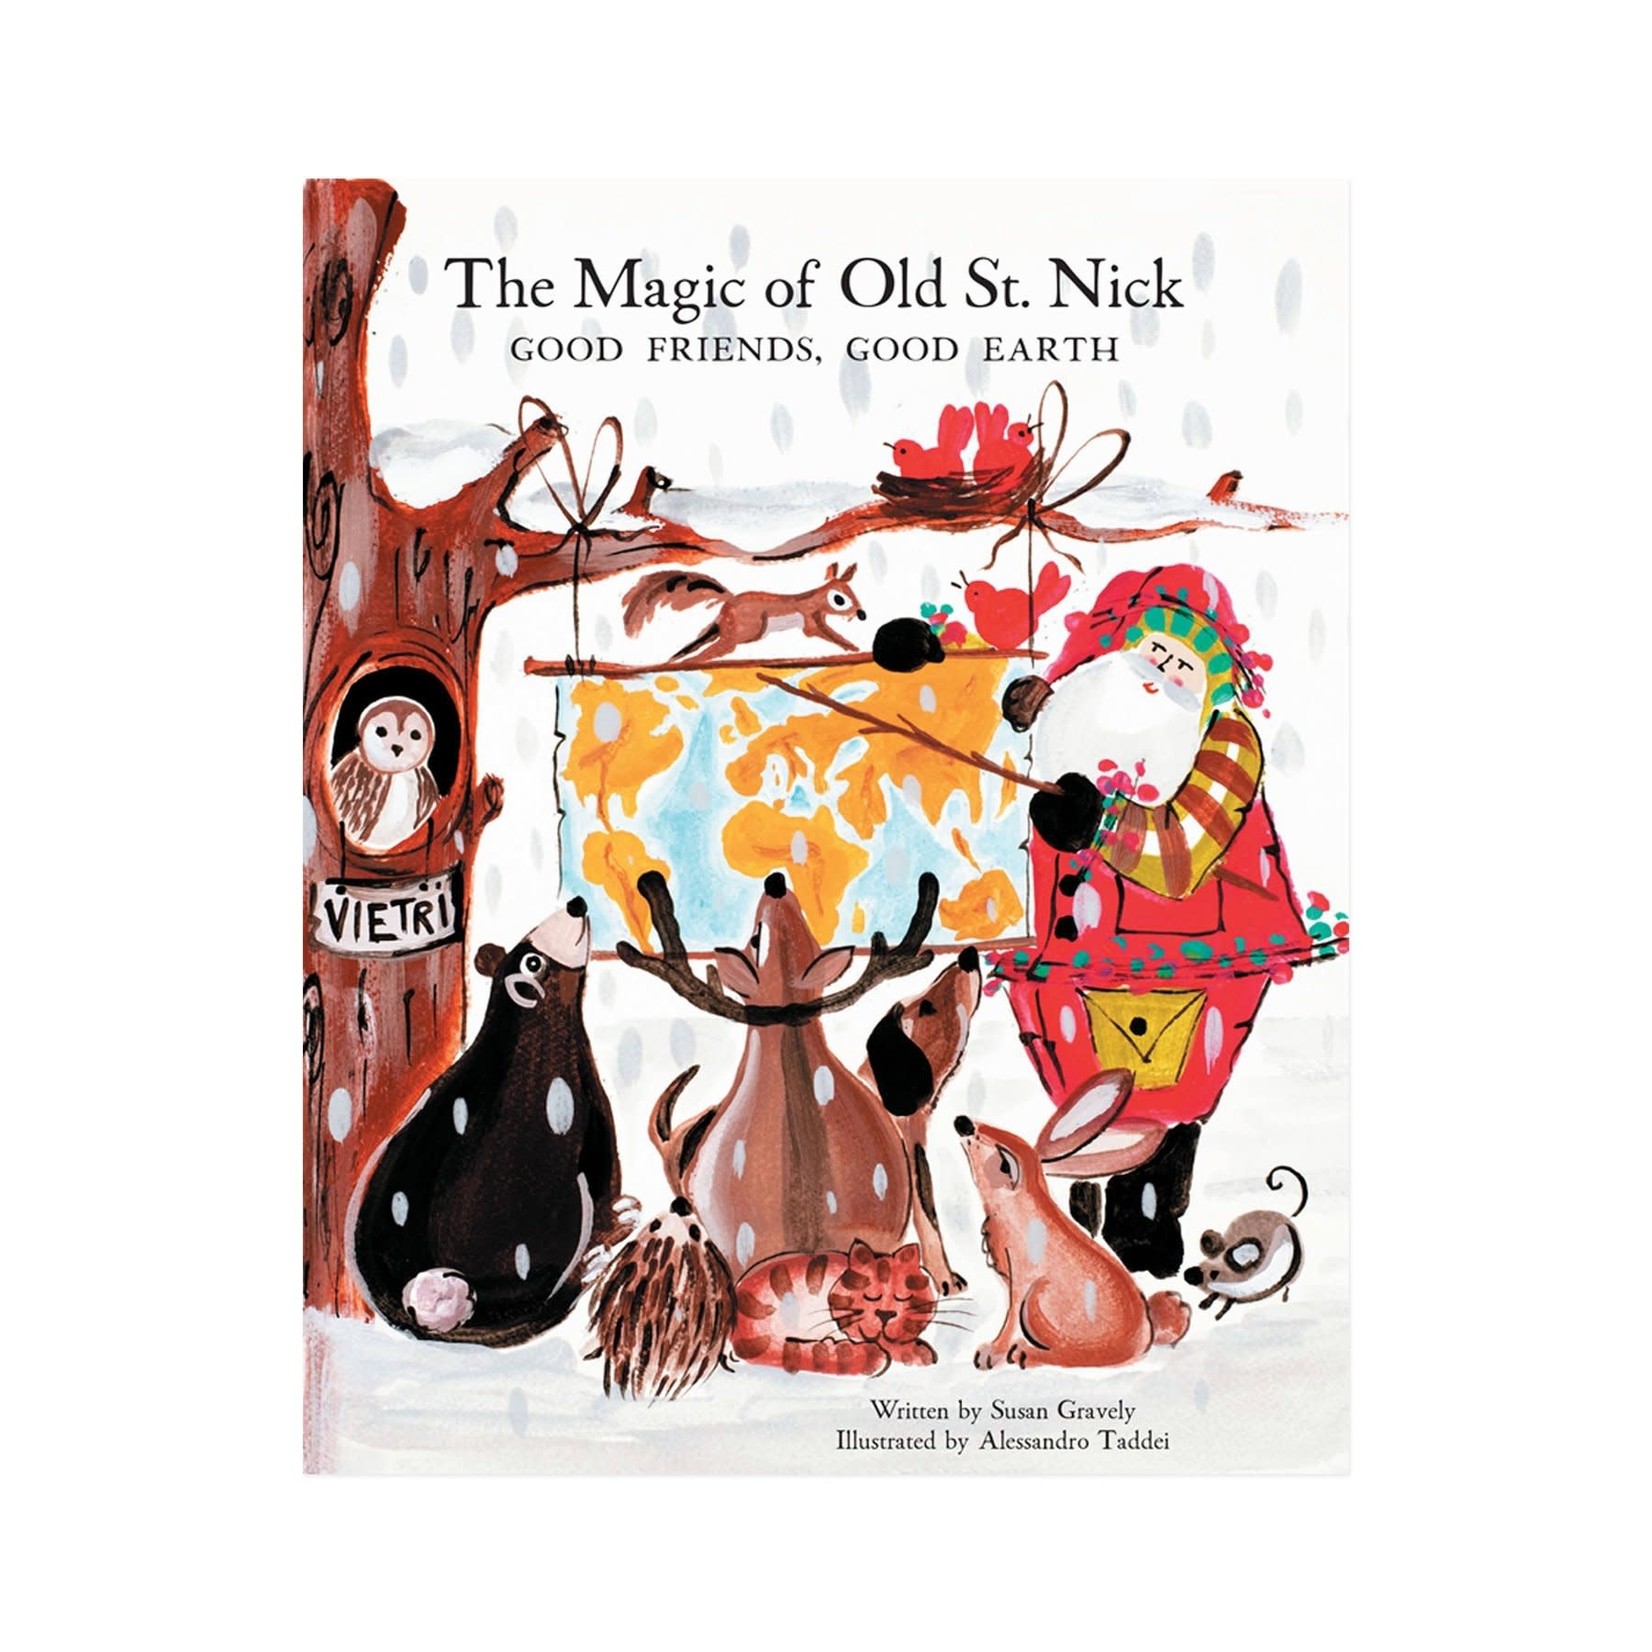 The Magic of Old St. Nick Good Friends, Good Earth